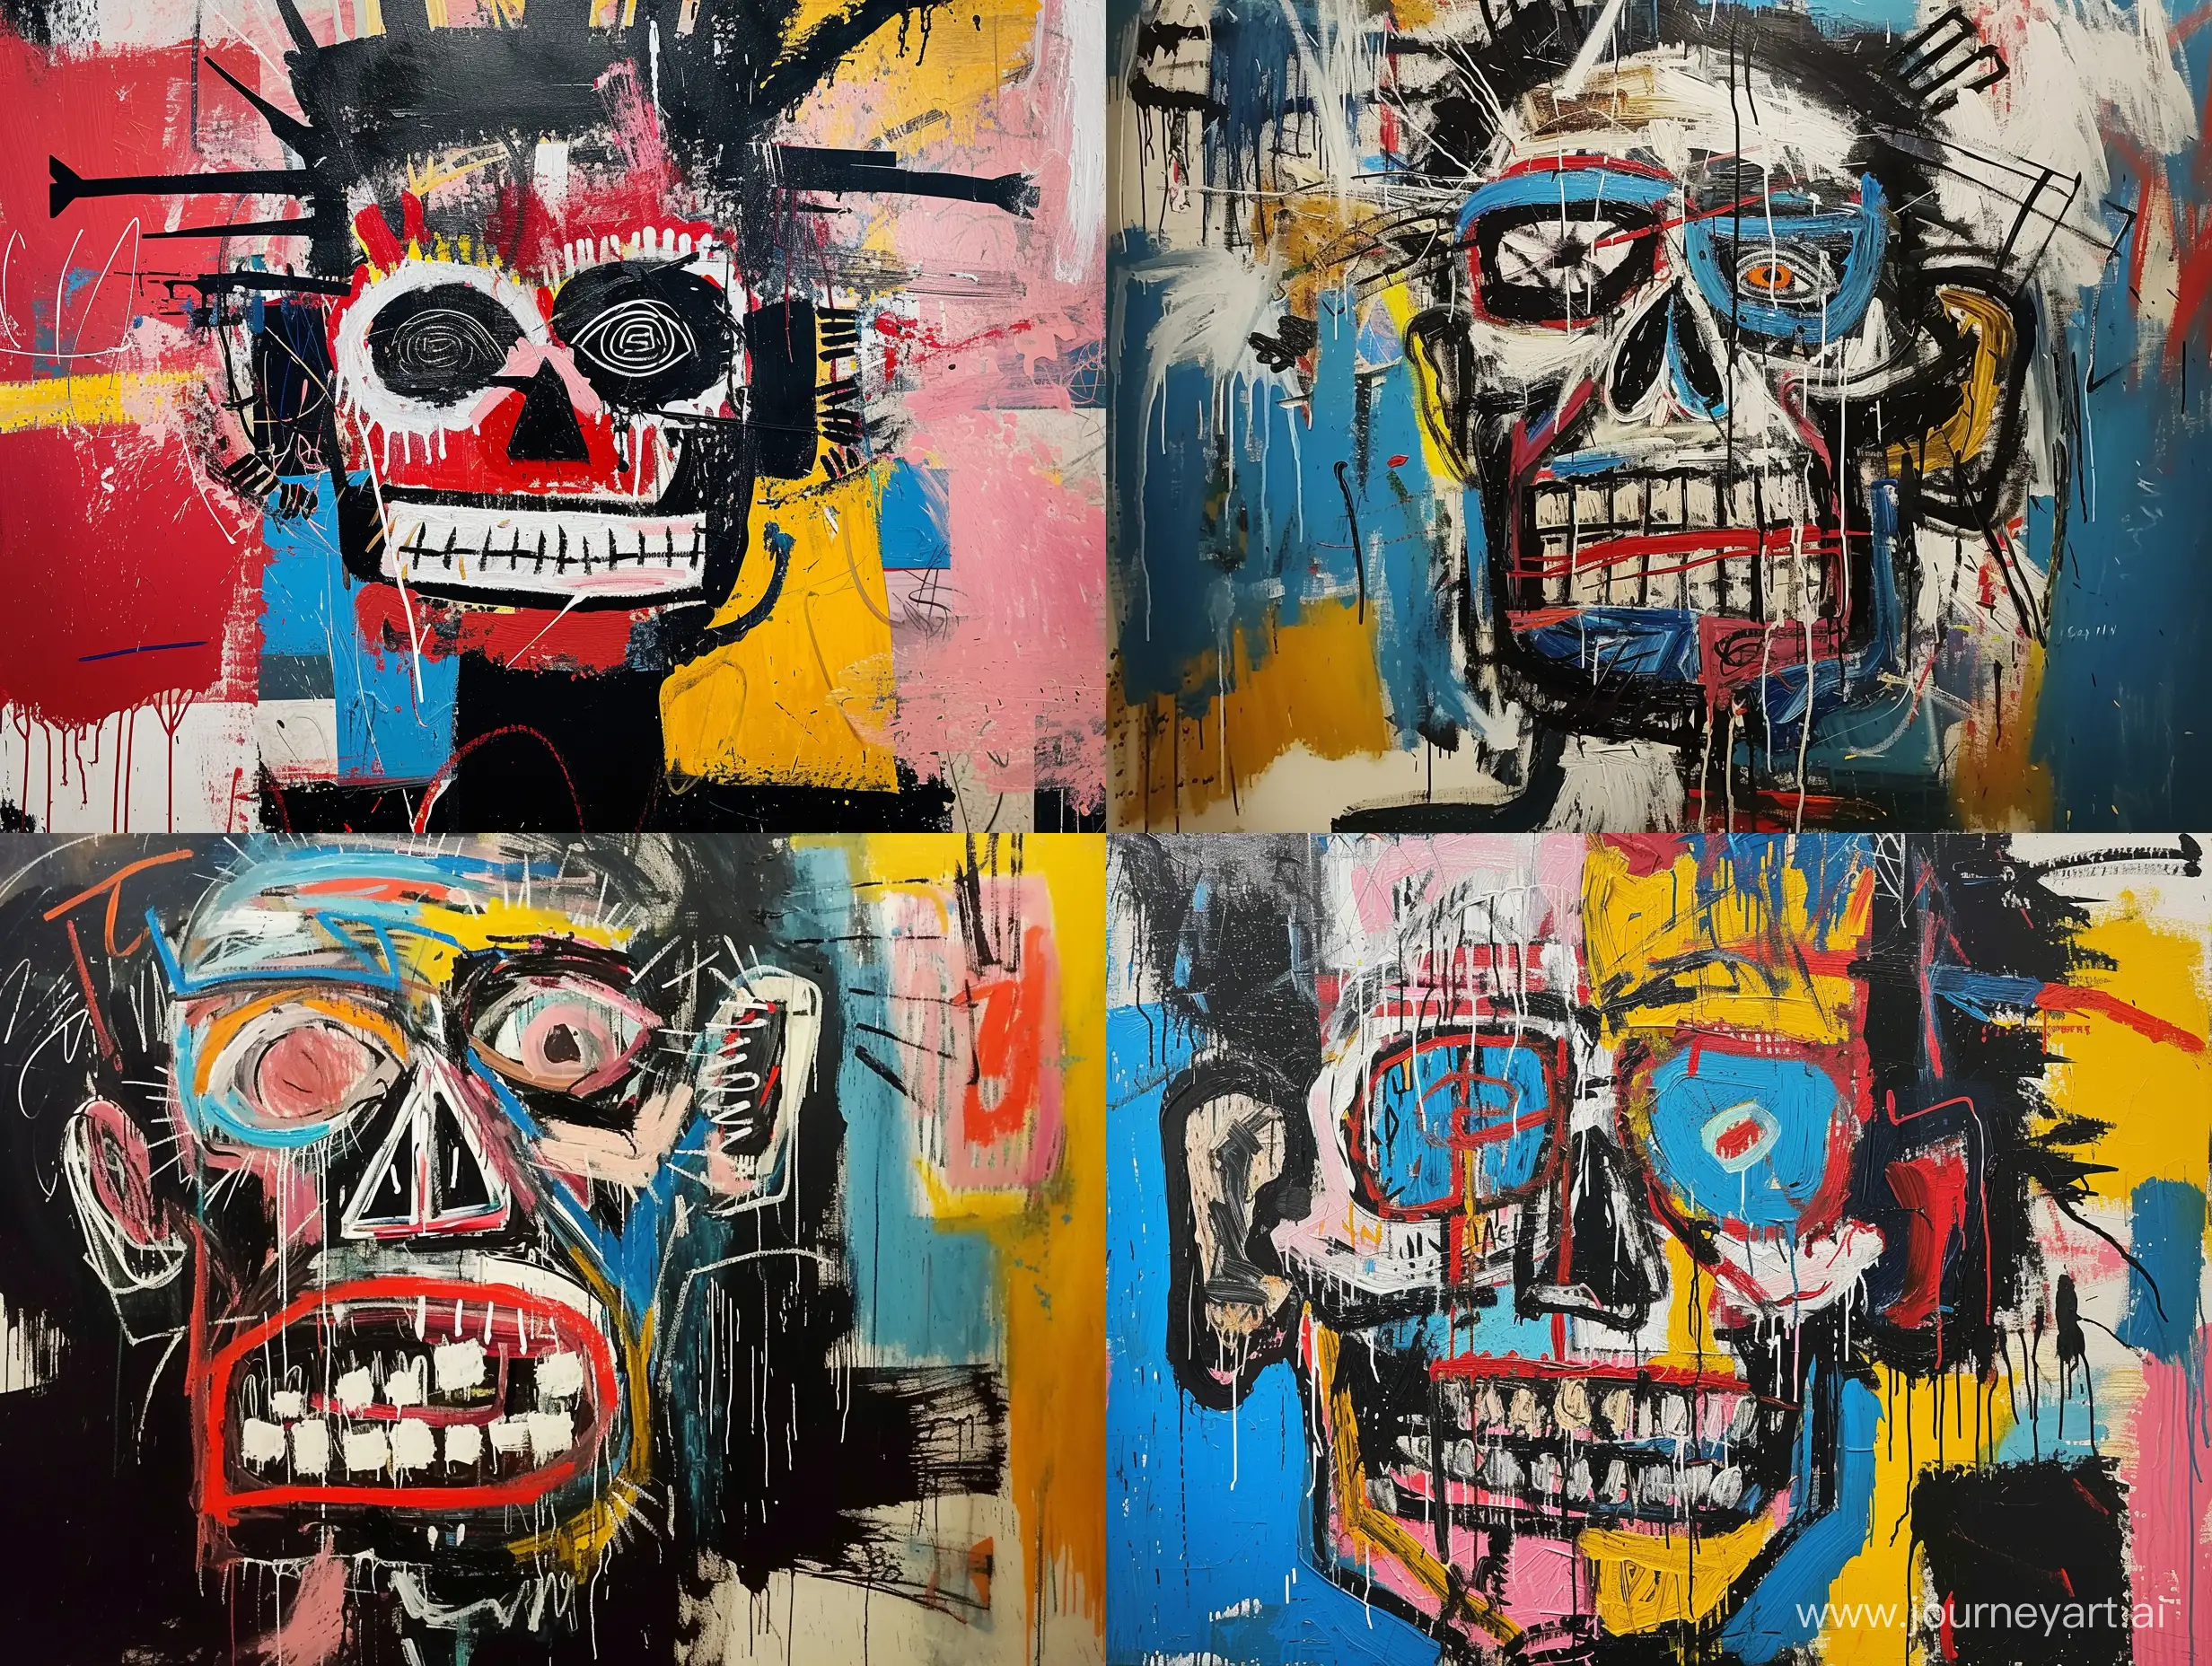 A beautiful magnificent immaculate award winning professional realistic painting in the style of jean michel basquiat